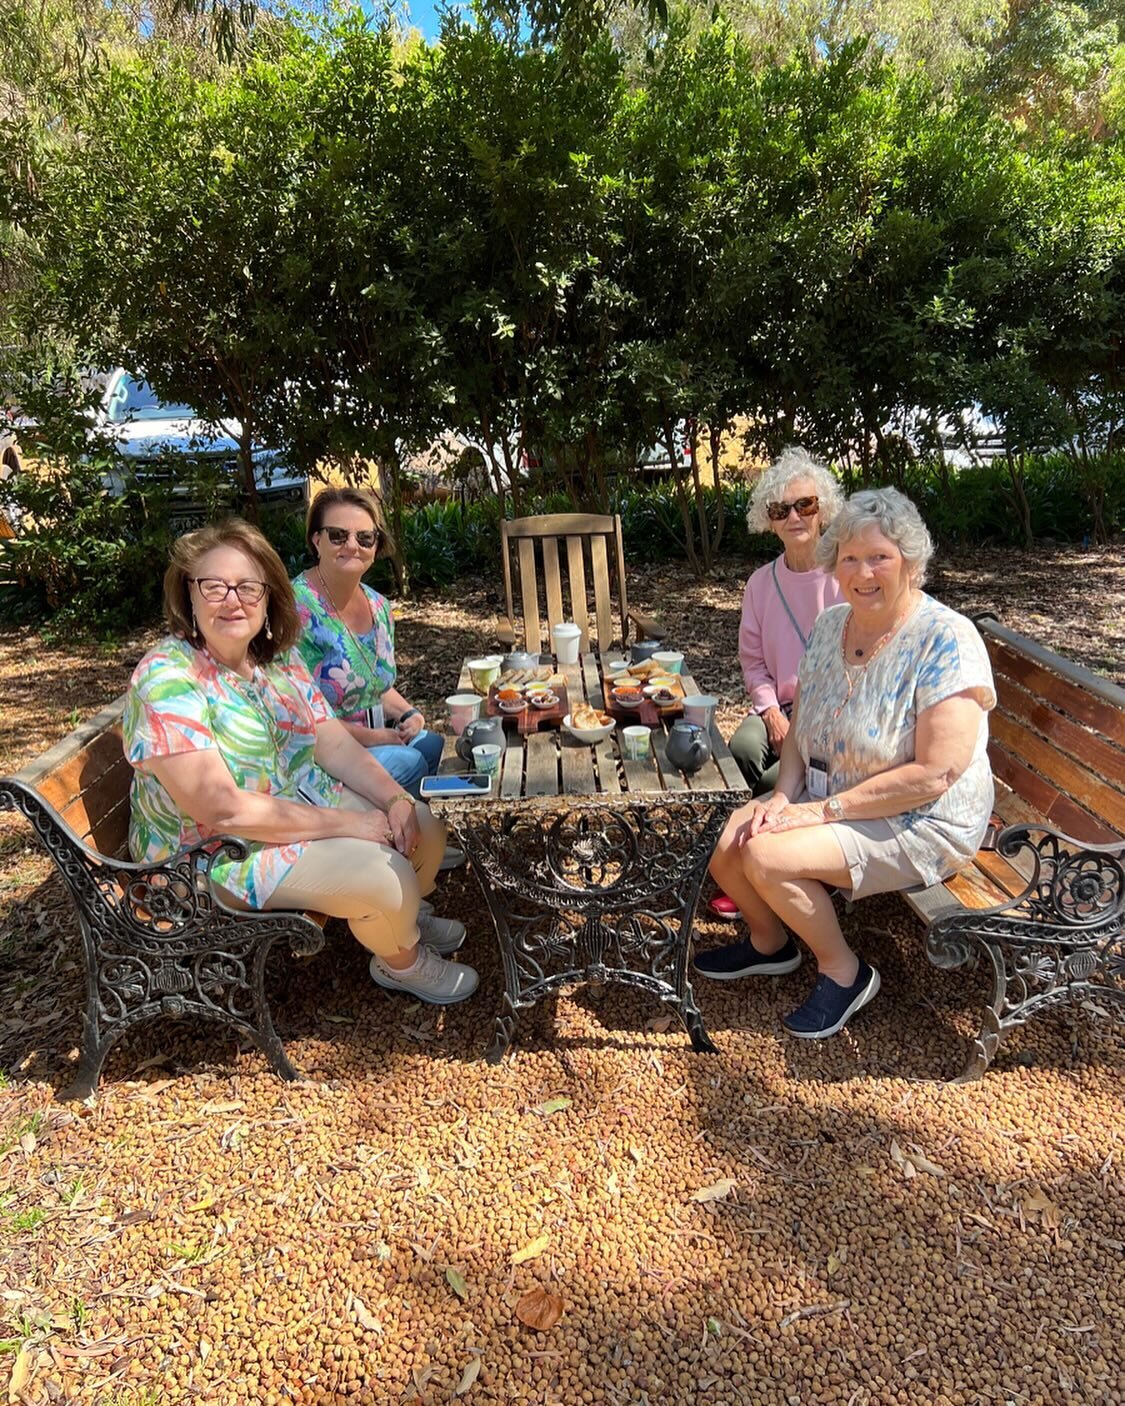 It was such a pleasure having these lovely ladies on tour from Texas, arriving off a cruise ship into Busselton. 3 first timers to Australia, all first timers to WA. At the end of their cruise in Sydney they said that their south west tour was a stan